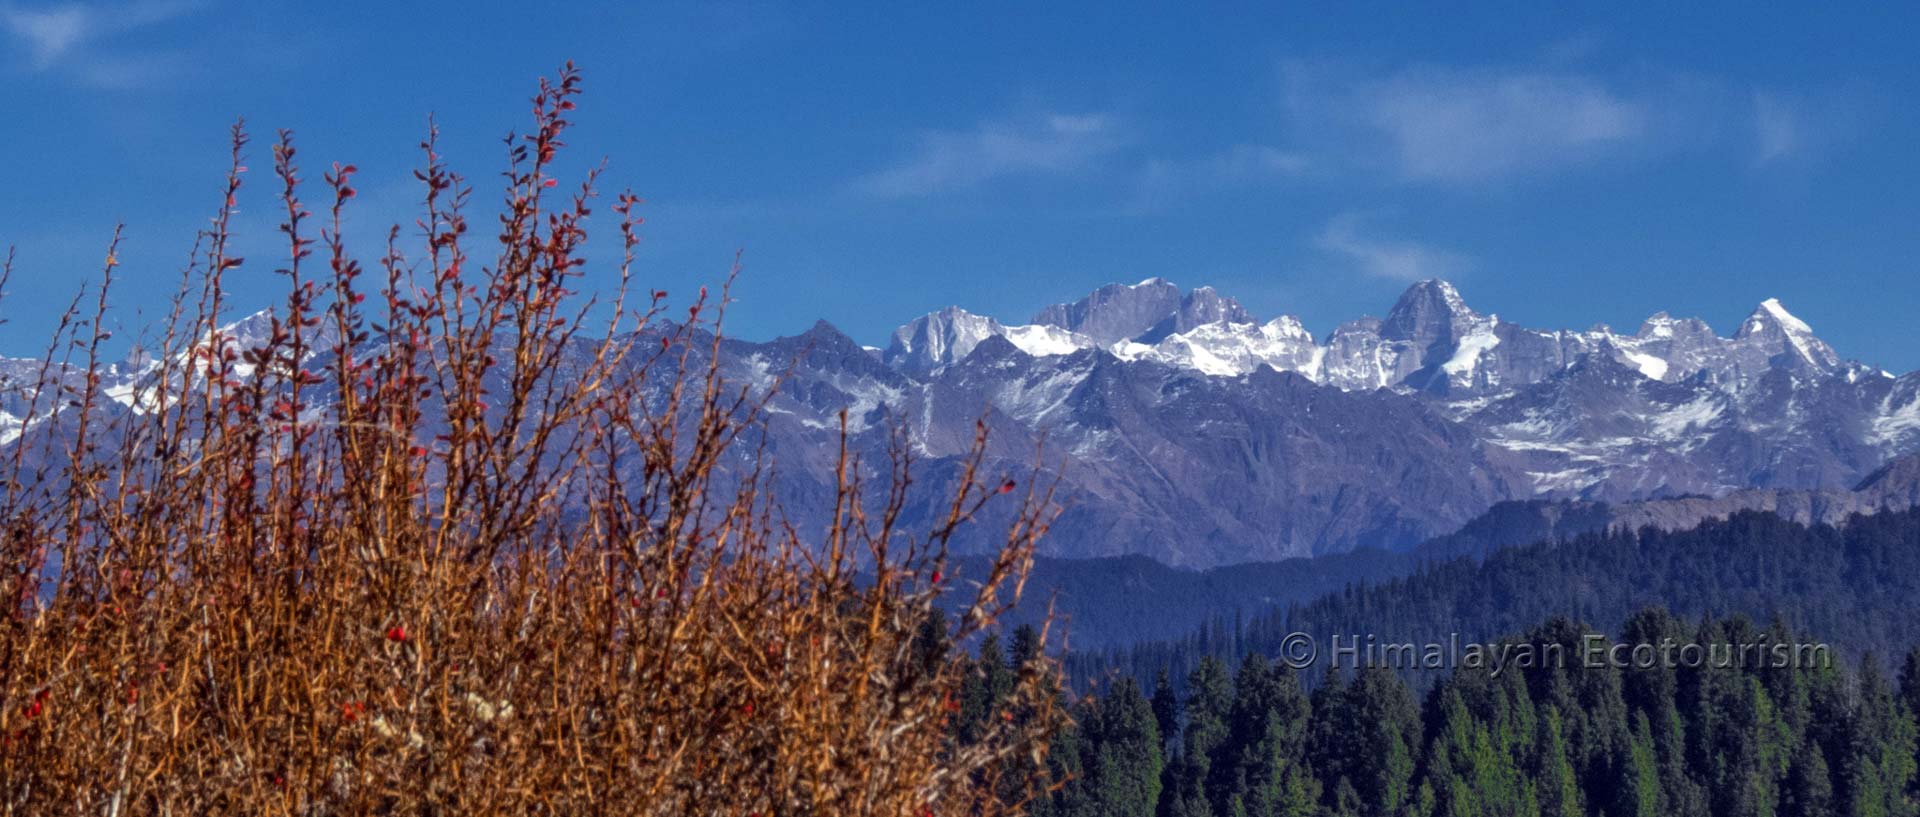 Great Himalayan National Park in Himachal